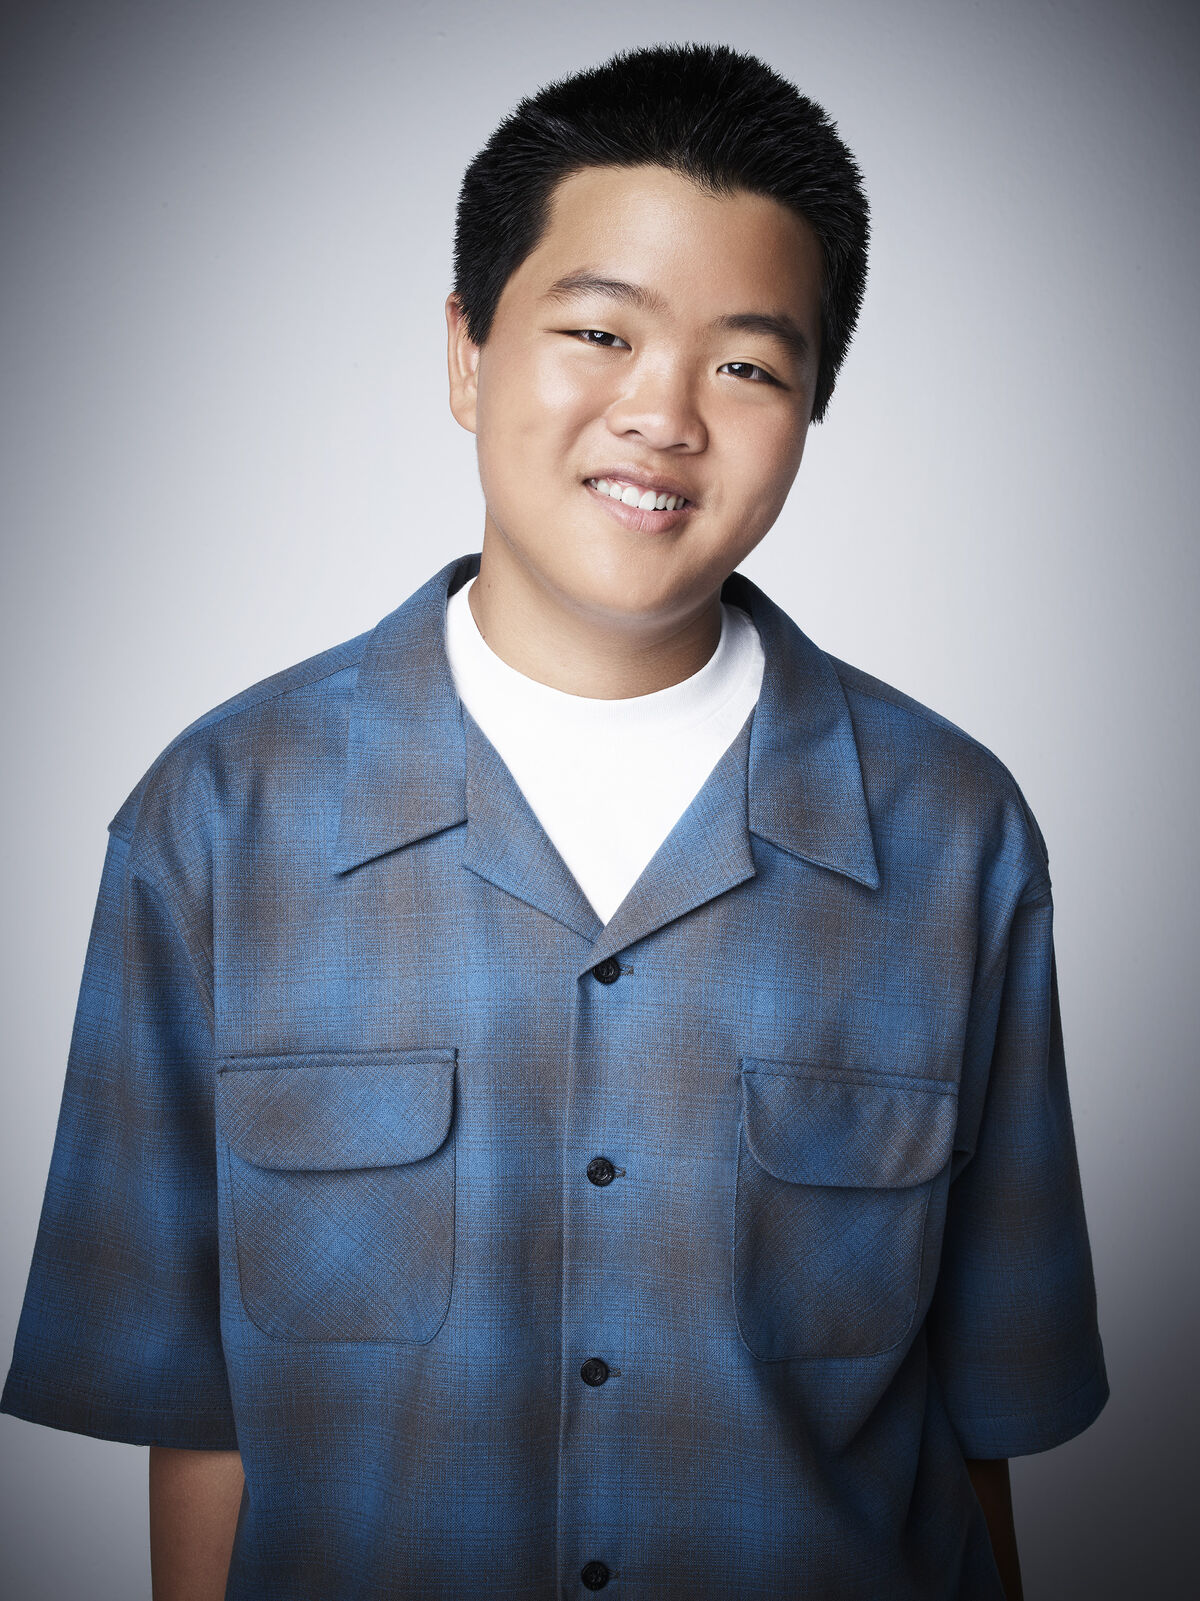 ABC Orders Pilot for Eddie Huang's Fresh Off the Boat - Eater